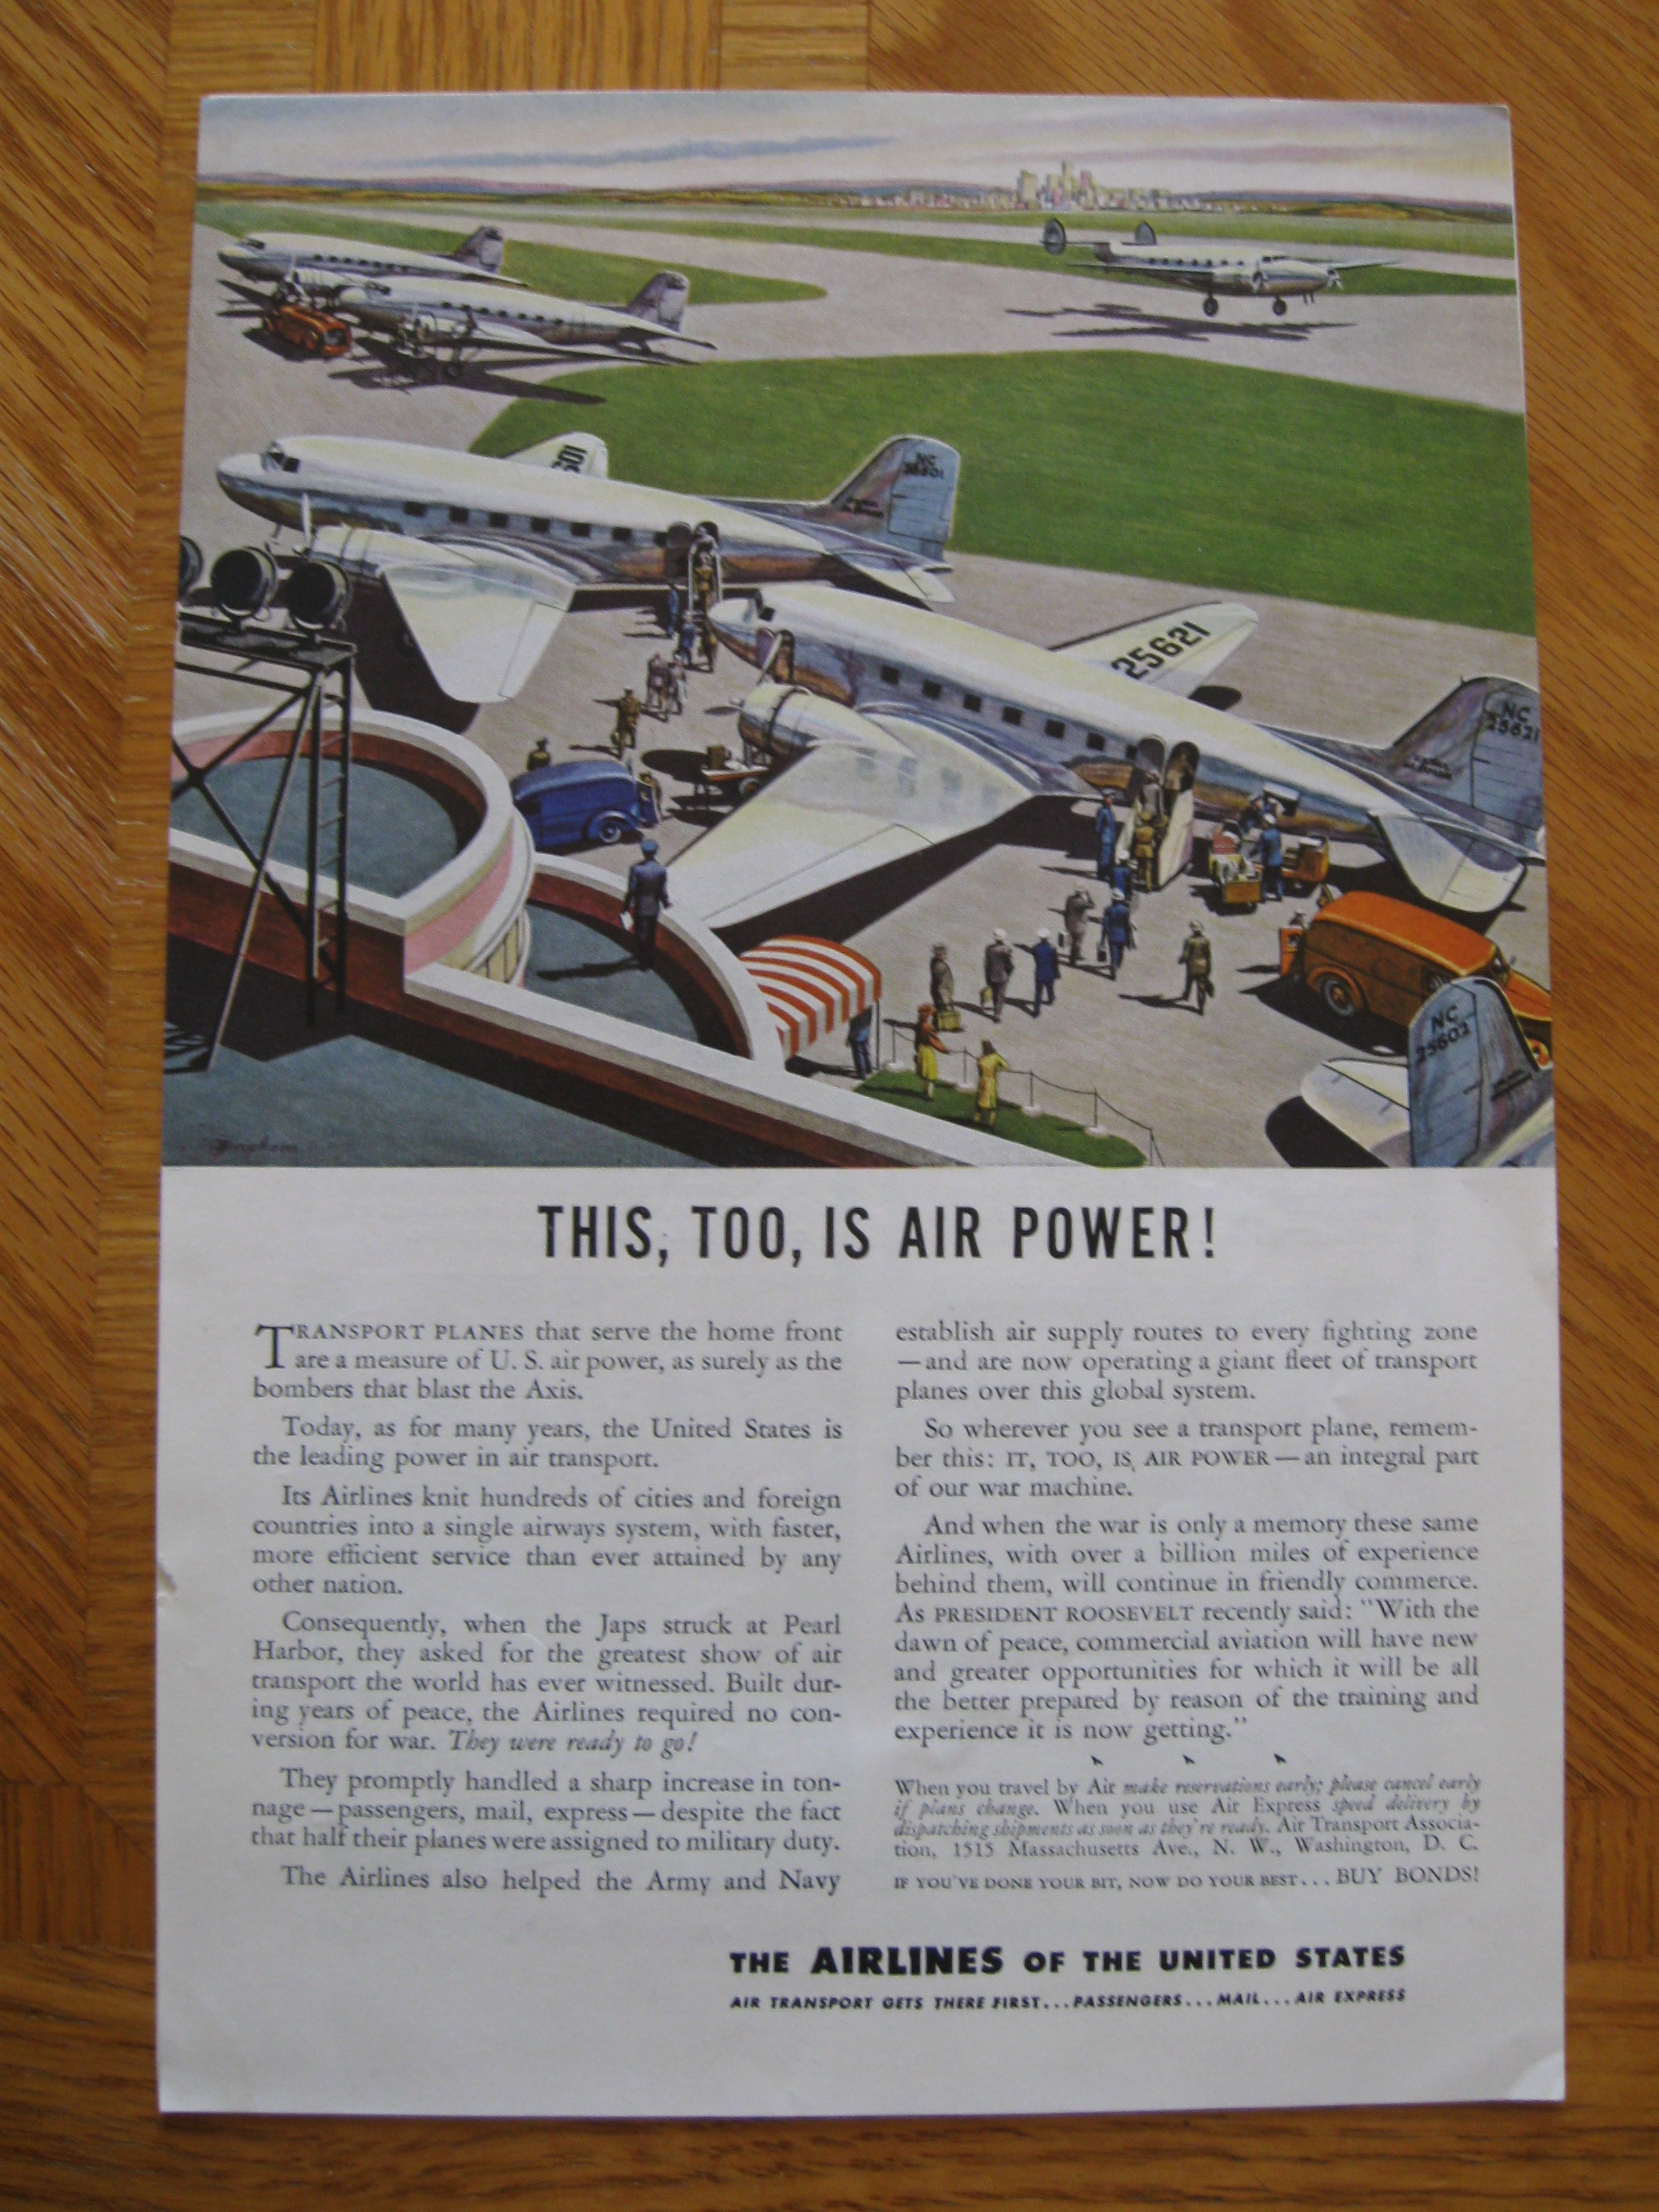 This too is air power! National geographic ad